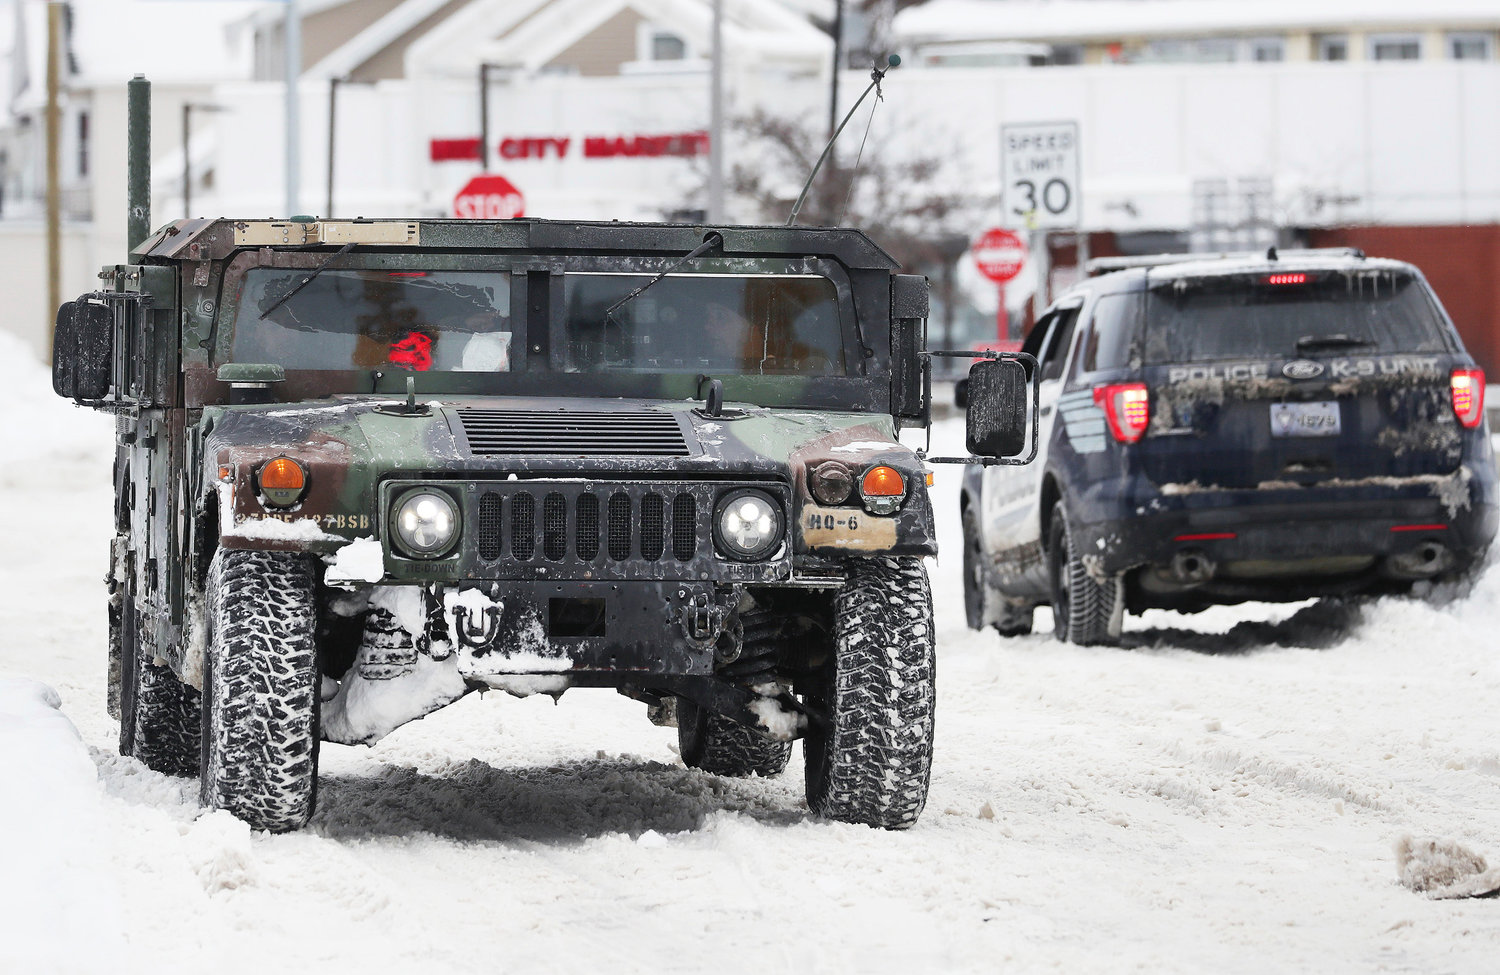 A National Guard truck drives past a police cruiser on a snowy street in Buffalo on Tuesday, Dec. 27. The National Guard is in Buffalo to help with clean up after a blizzard hit four Western New York counties.